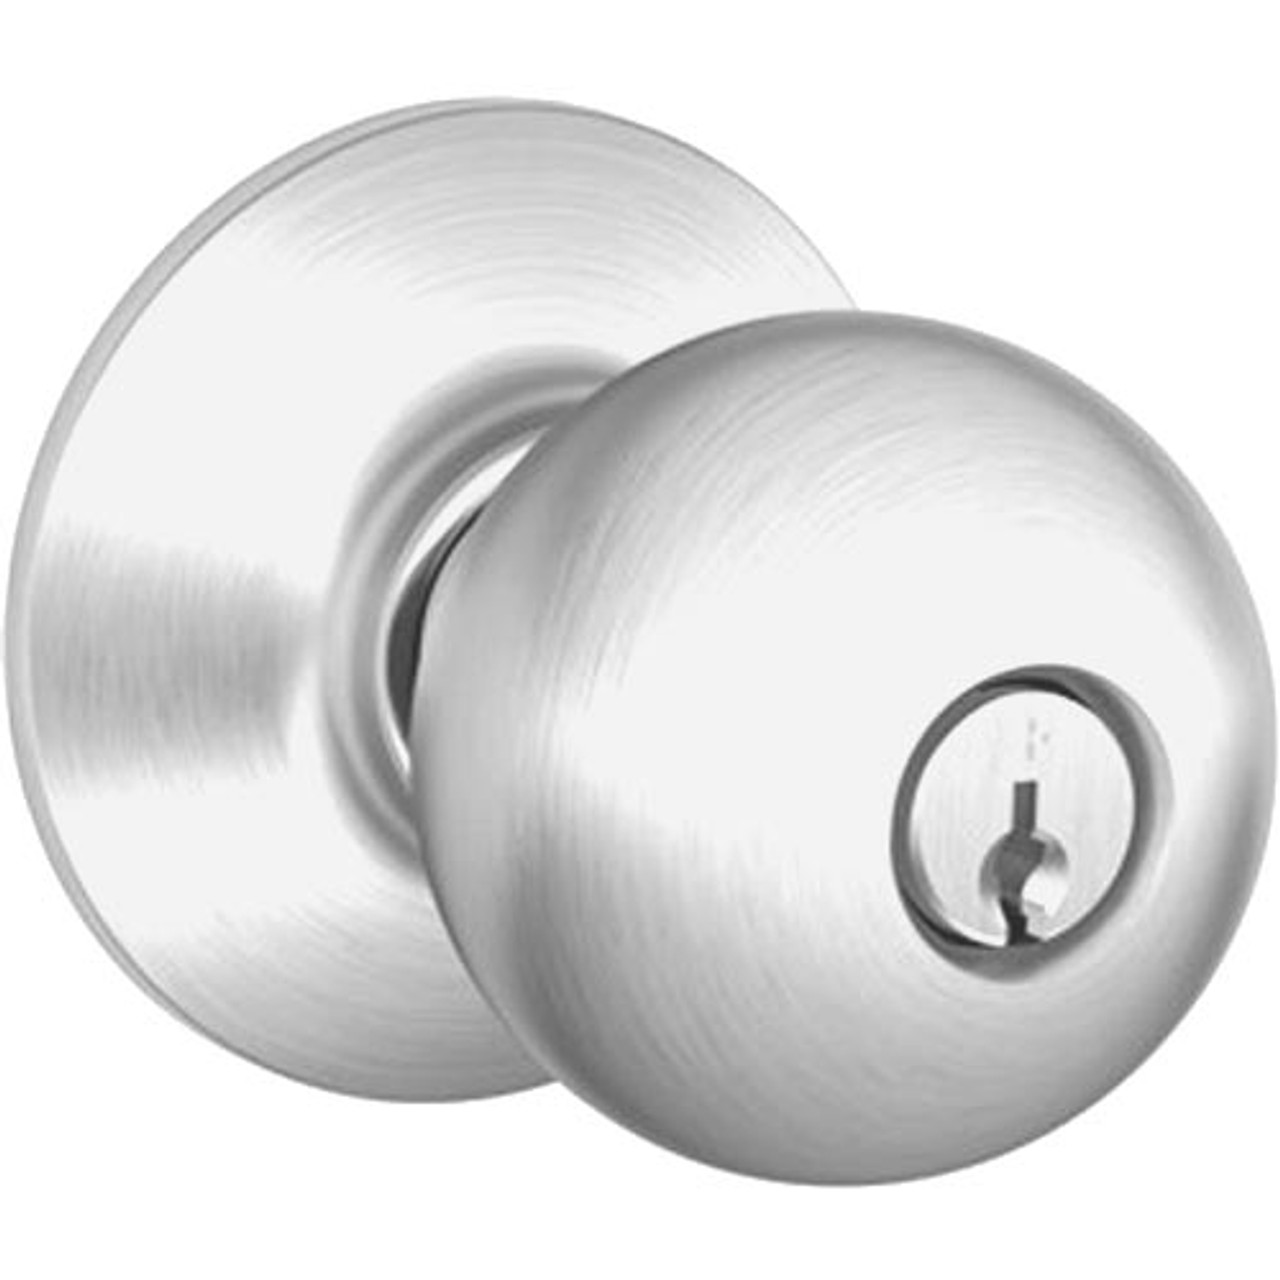 A70PD-ORB-625 Schlage Orbit Commercial Cylindrical Lock in Bright Chromium Plated